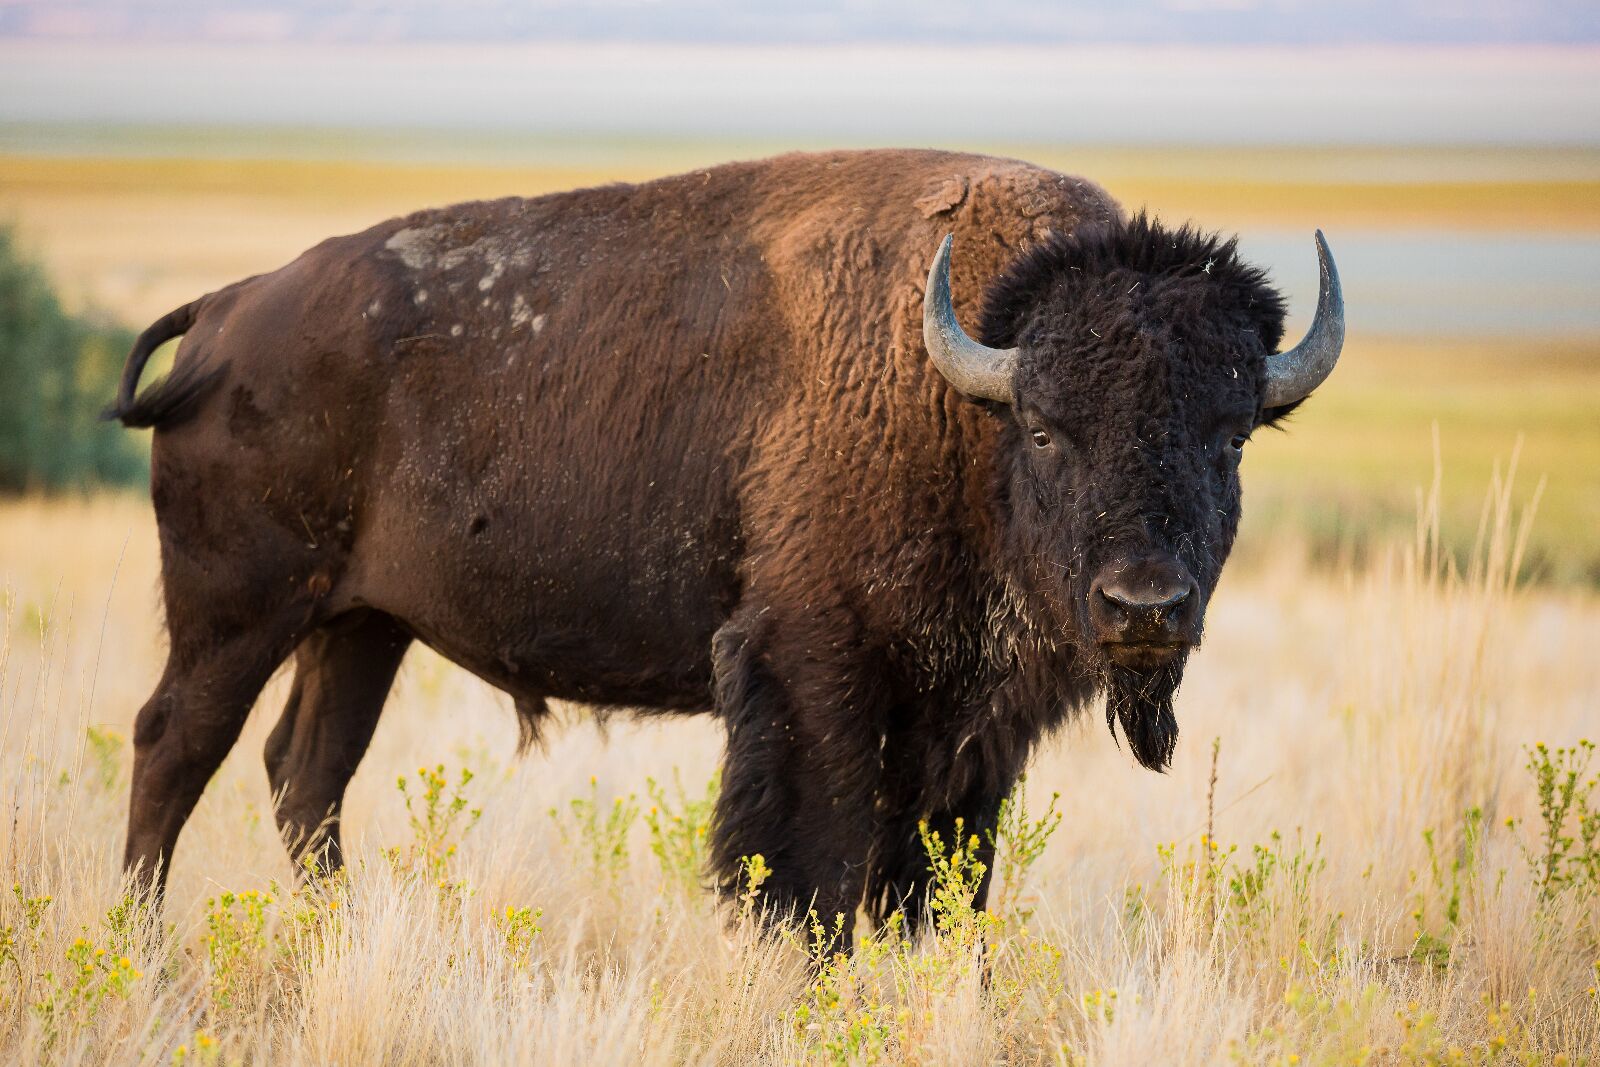 gored by bison on TikTok, American Bison in field